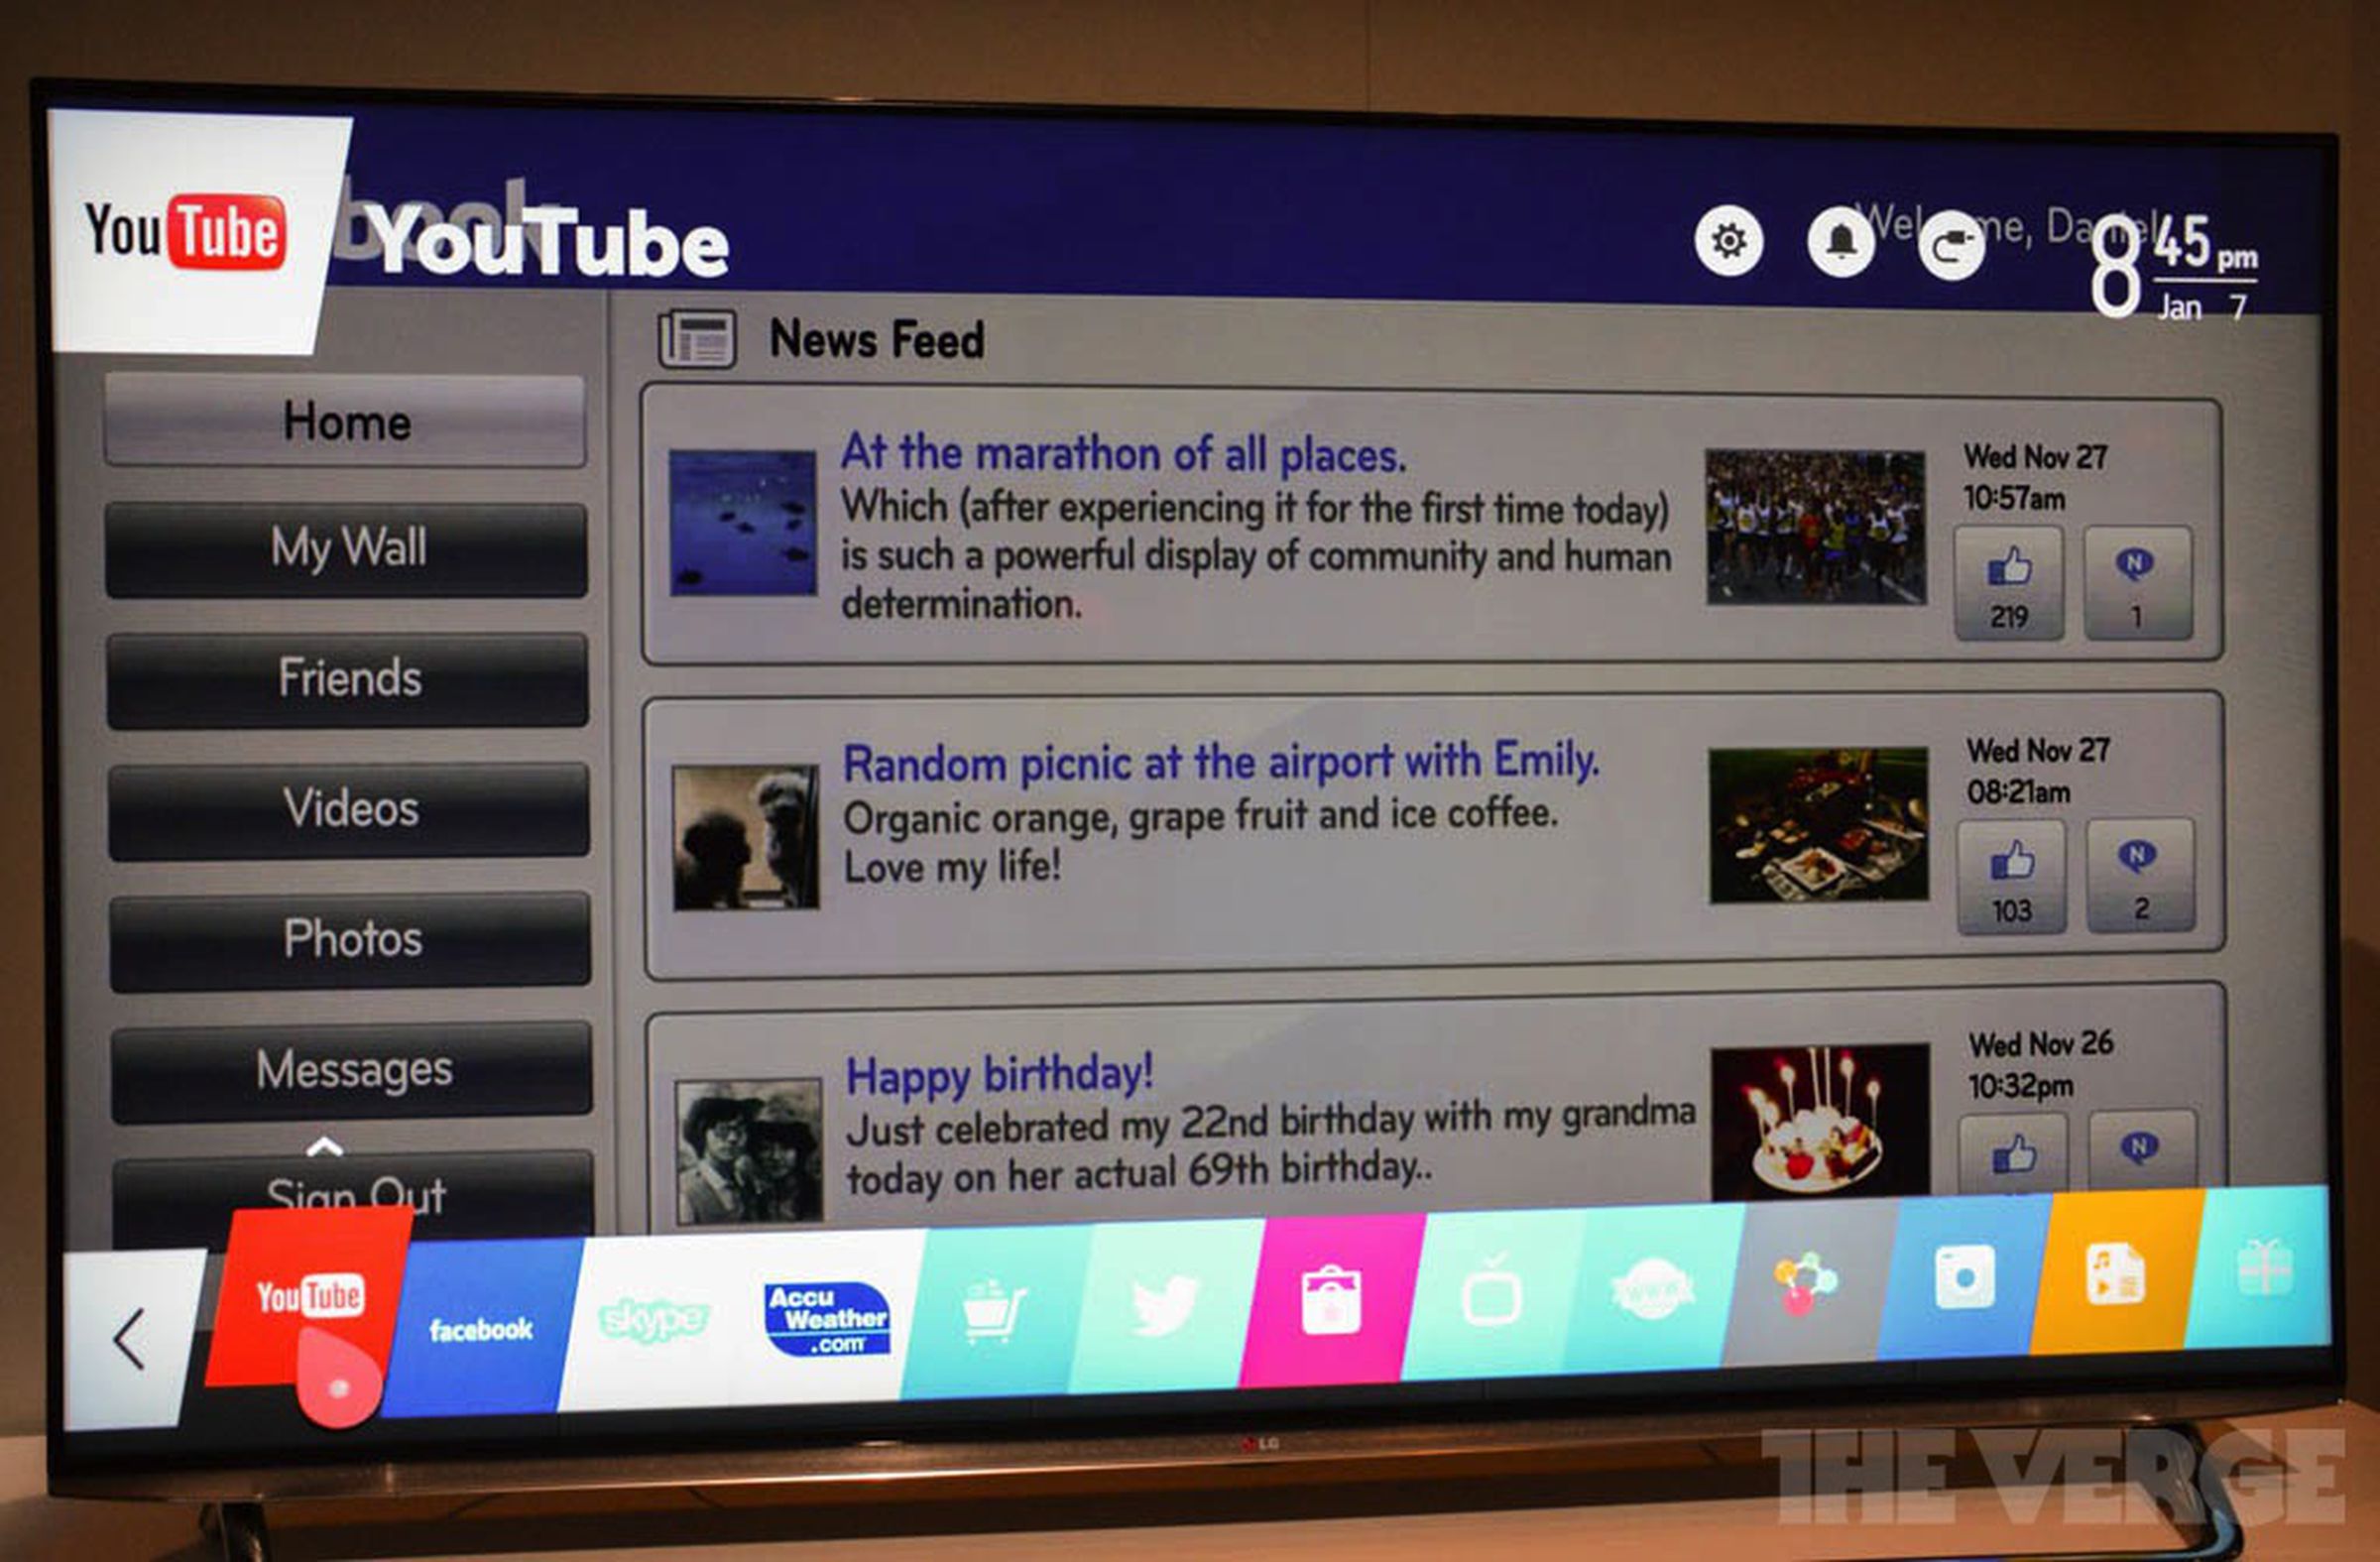 WebOS on LG's new TVs